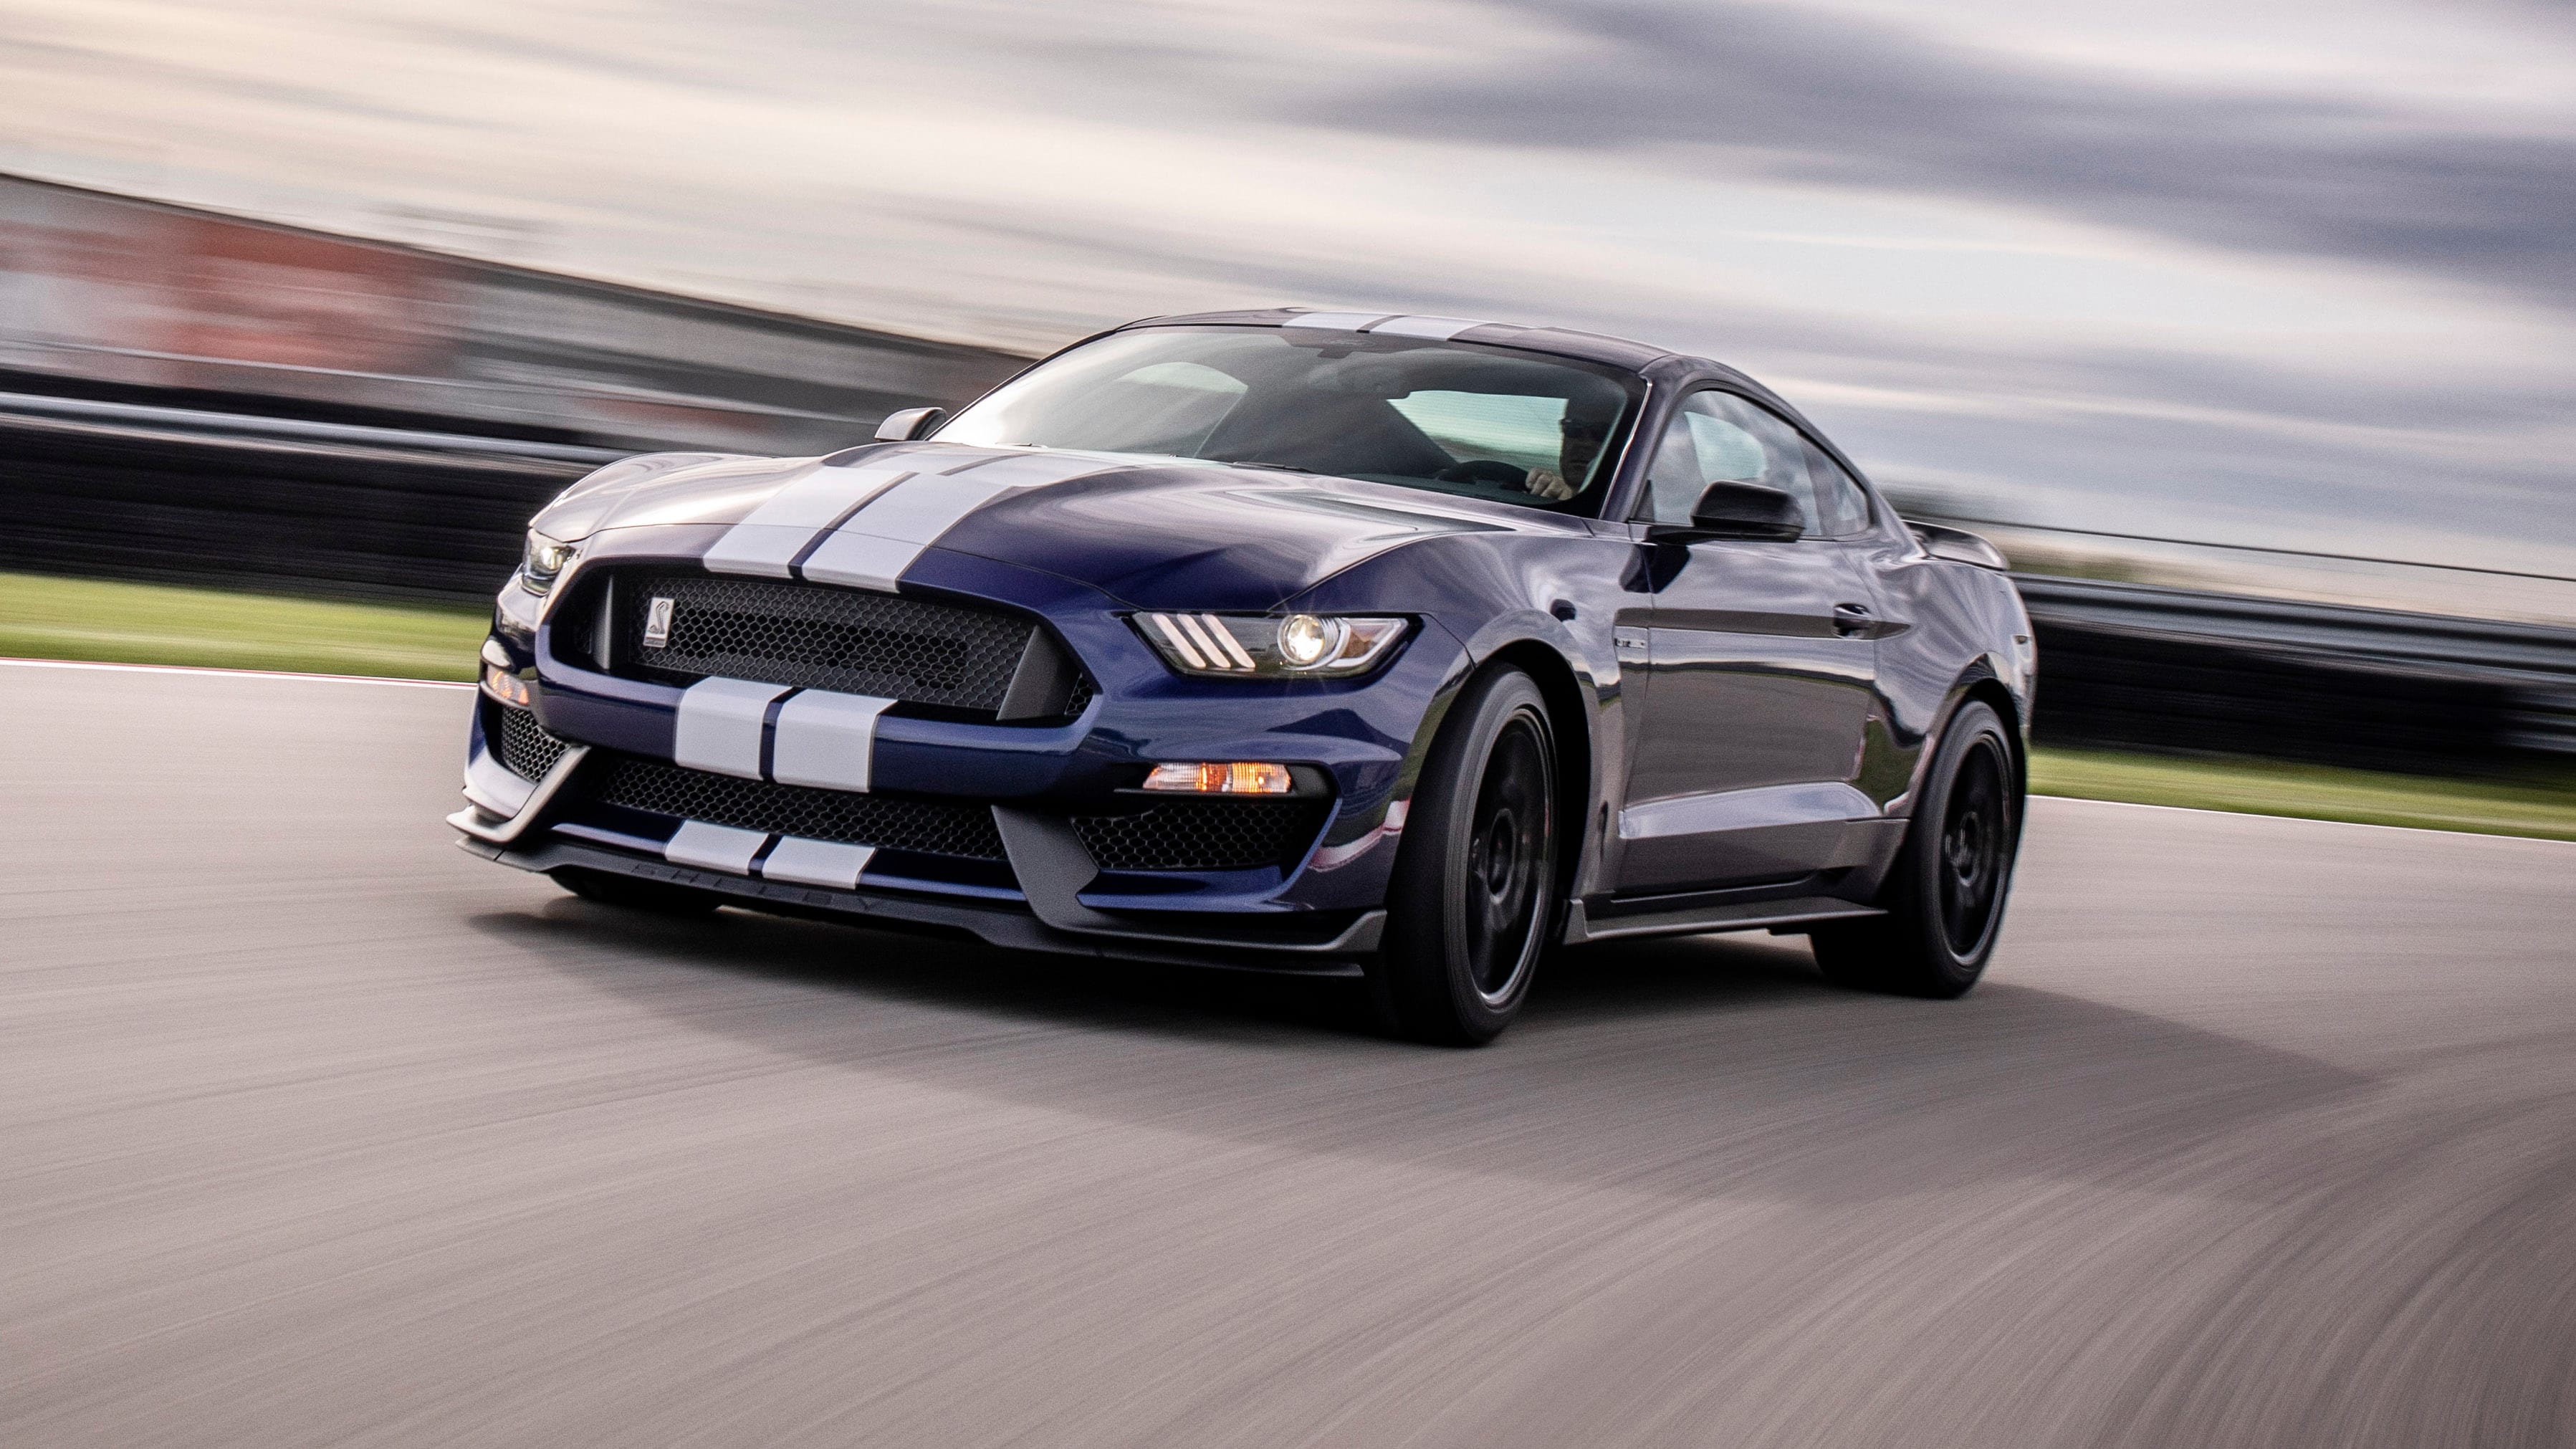 2020 Ford Mustang Shelby Gt350 Review Caradvice